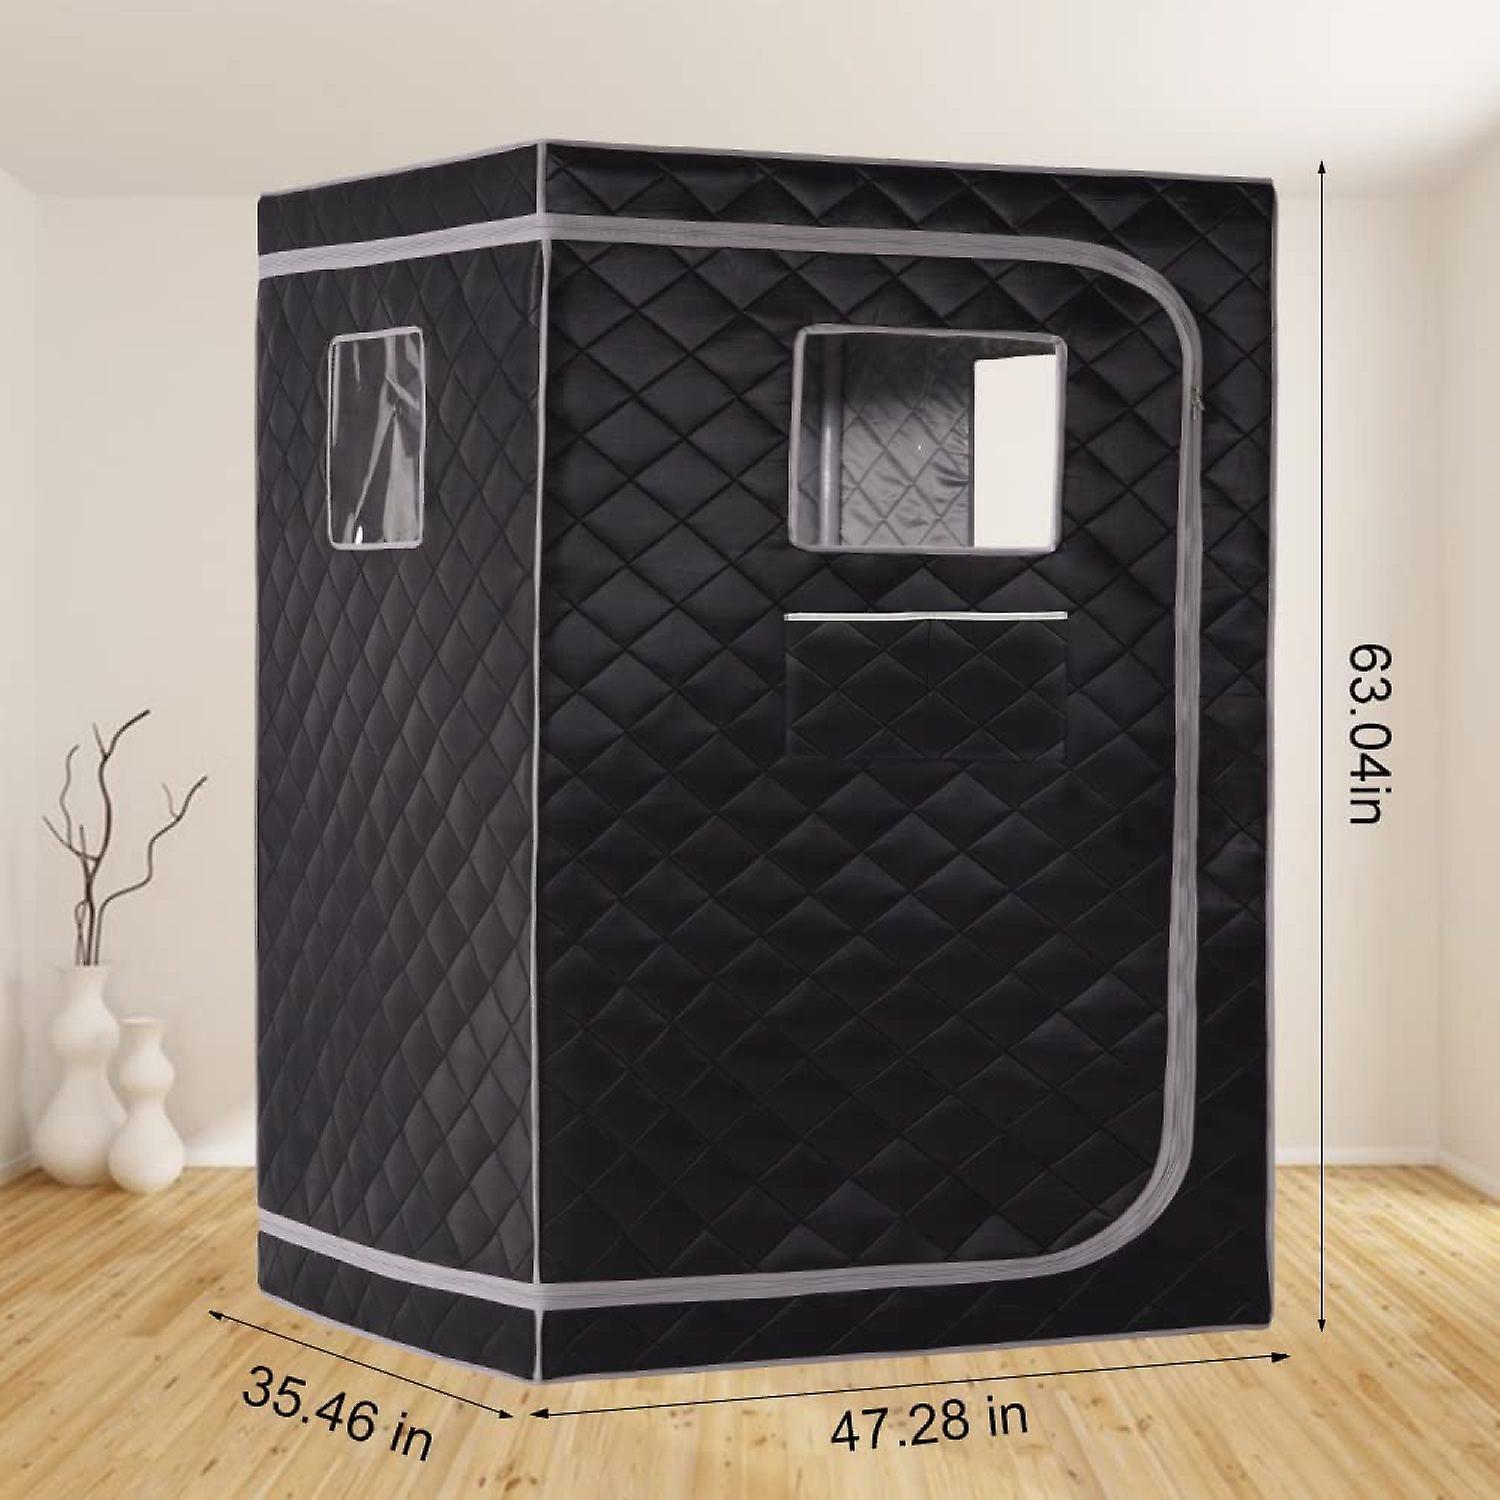 Full Size Steam Sauna Tent， Portable Whole Body Home Spa Room， One Or Two Person Large Space， Steamer Not Included (47.28